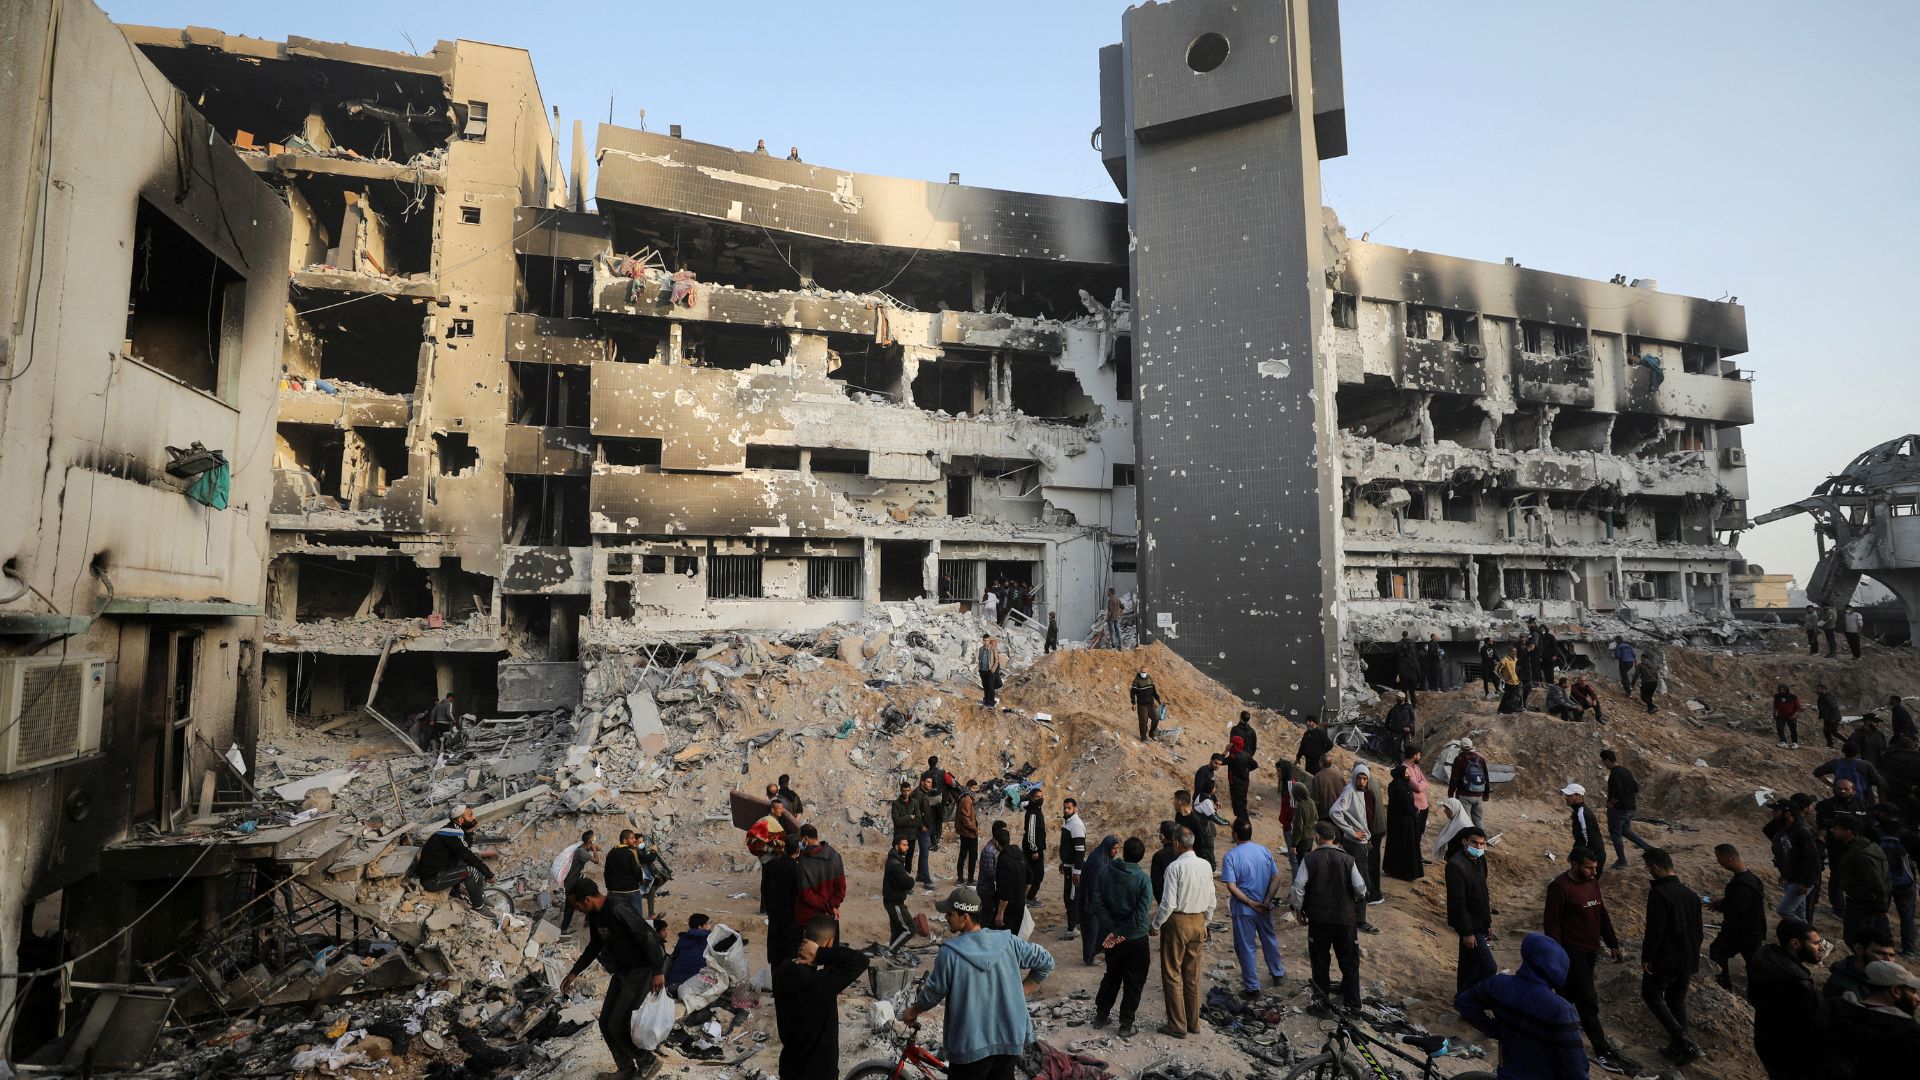 Palestinians inspect damage at Al Shifa Hospital after Israeli forces withdrew following a two-week operation. /Dawoud Abu Alkas/Reuters